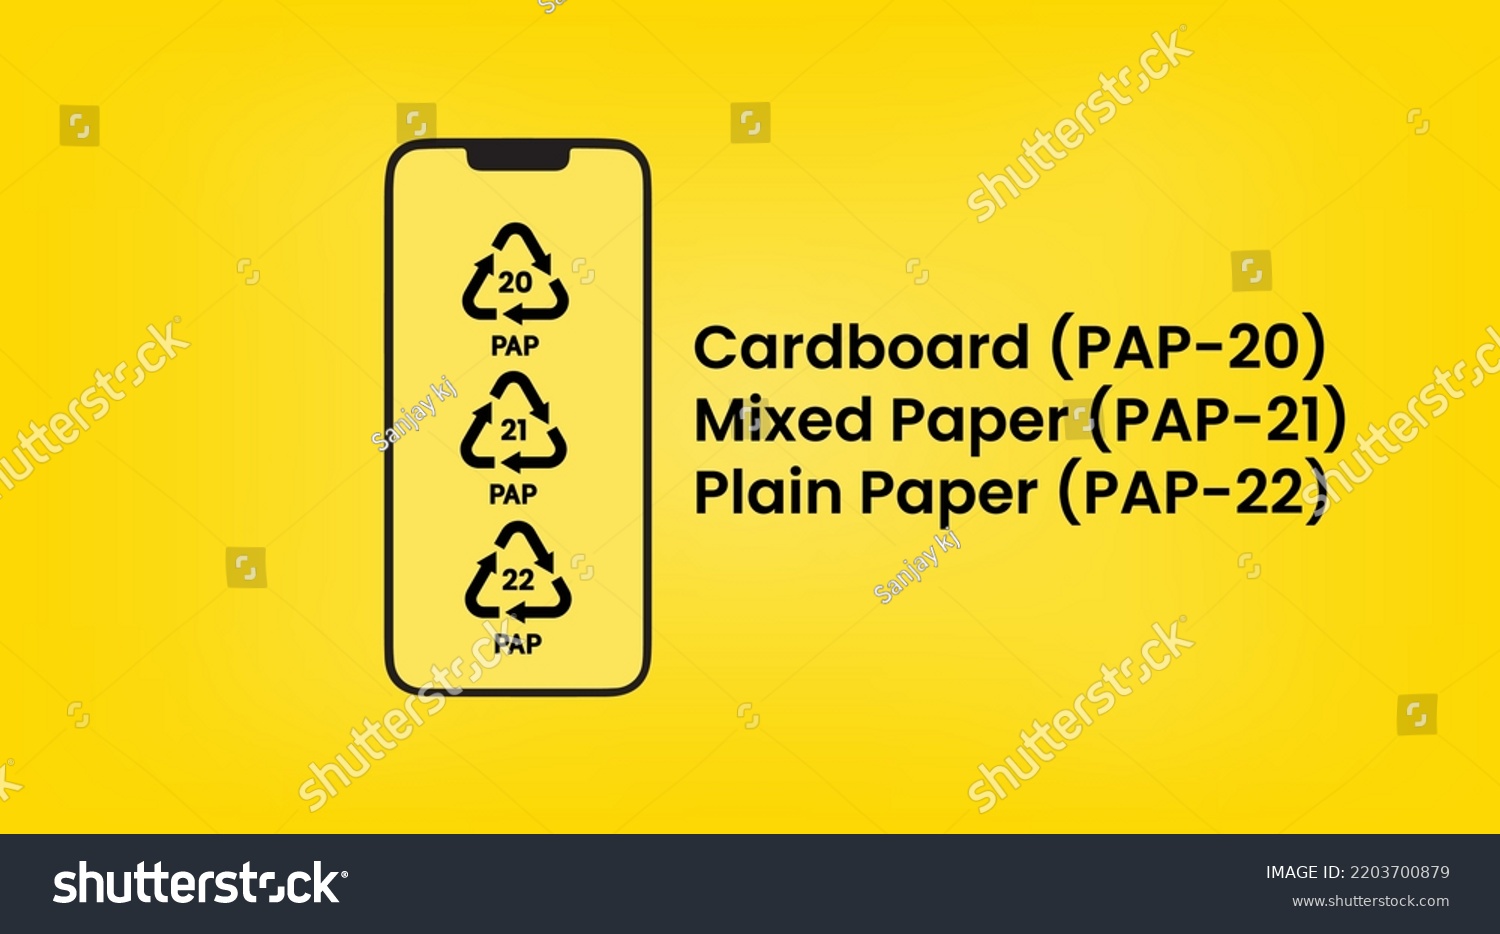 SVG of Paper recycling code poster. Cardboard, Mixed paper, Plain paper codes PAP-20, PAP-21, PAP-22 vector illustration. svg